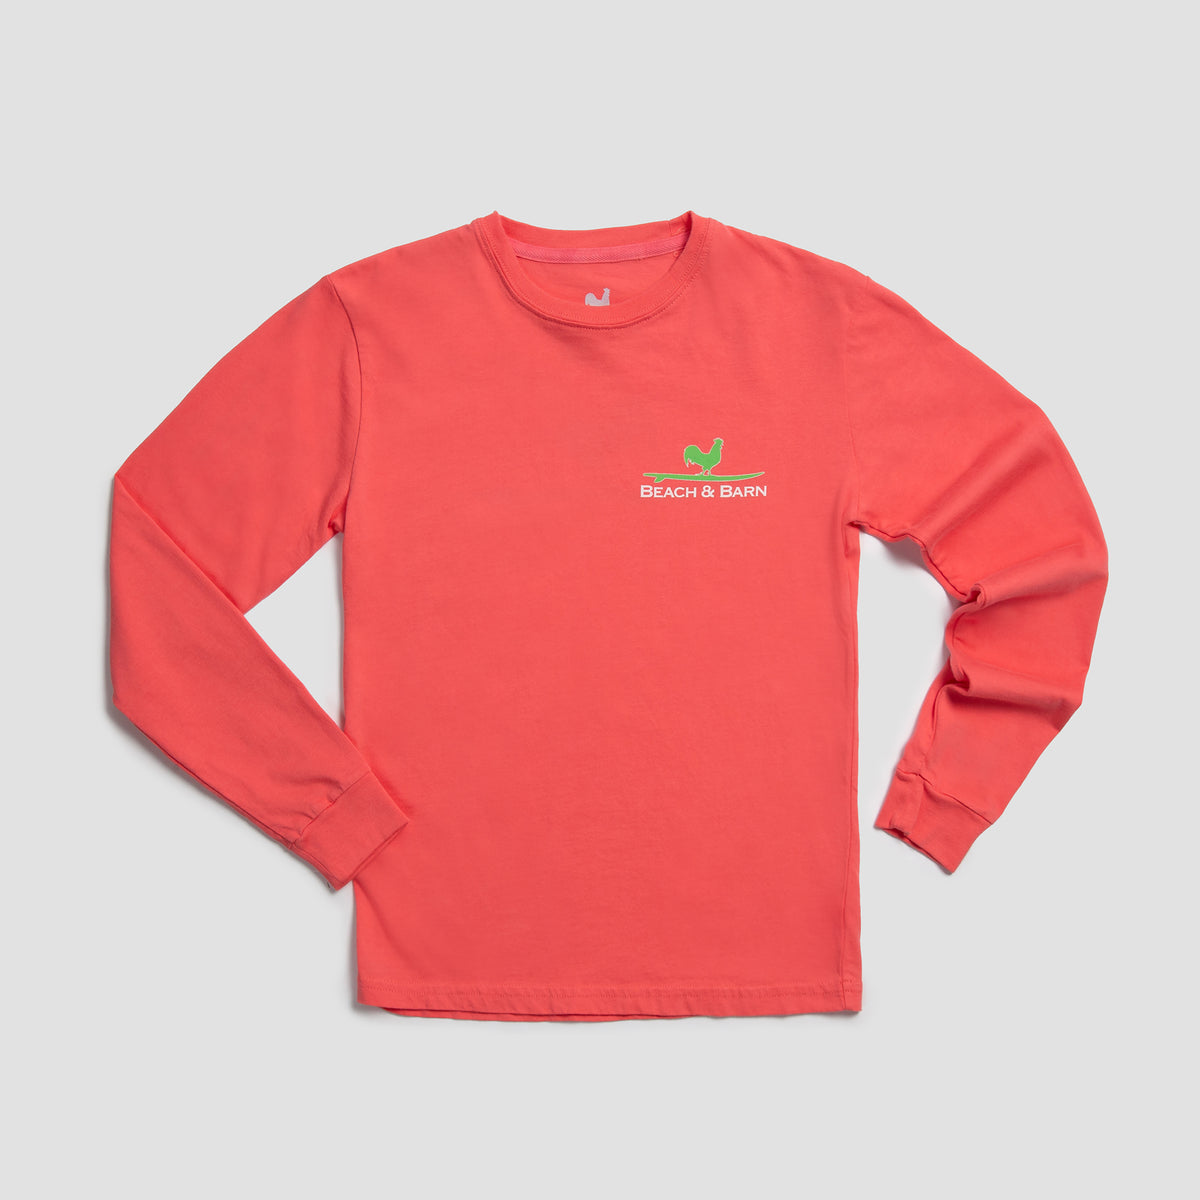 Sale - Kids Surfing Rooster Long Sleeve Tee Shirt